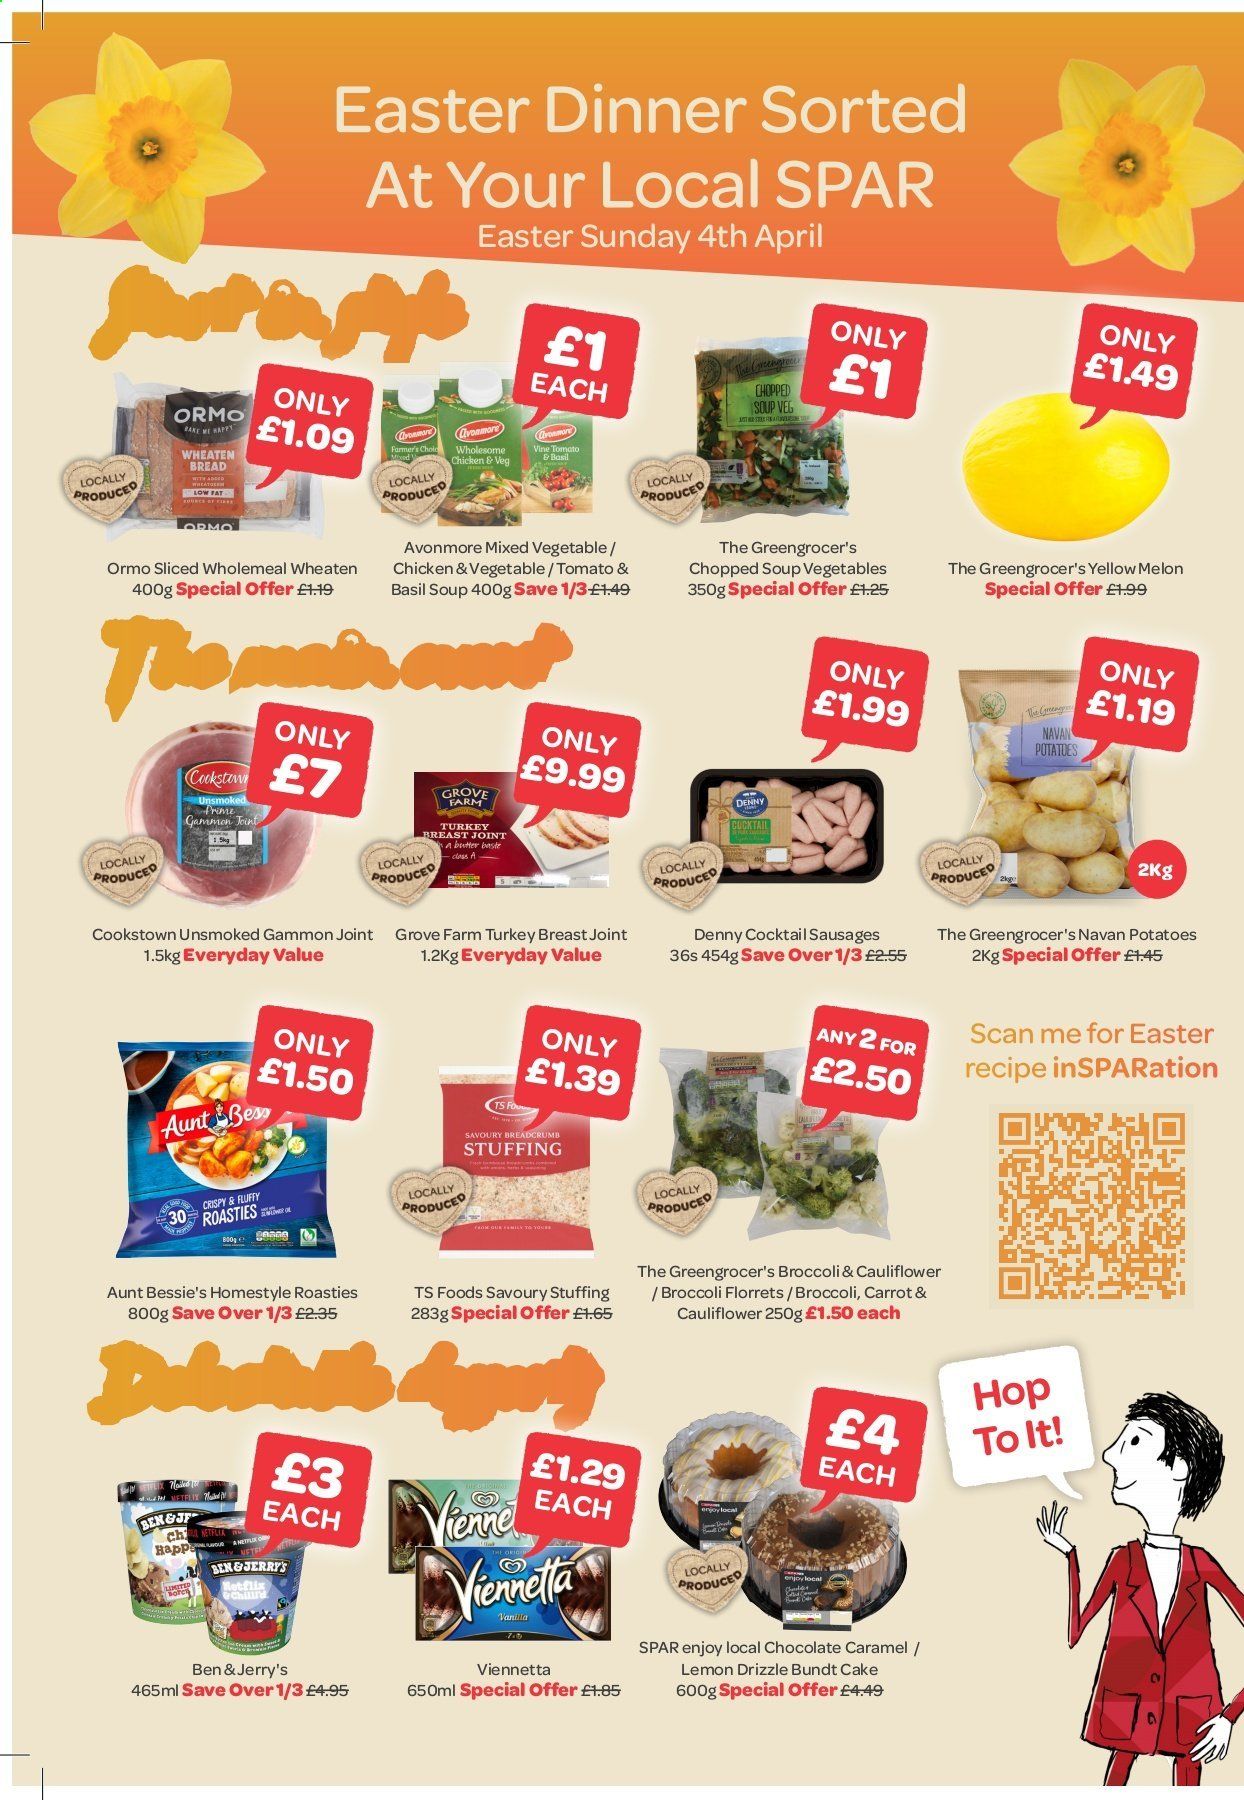 thumbnail - SPAR offer  - 29/03/2021 - 25/04/2021 - Sales products - broccoli, cauliflower, potatoes, mixed vegetables, melons, turkey breast, turkey, turkey joint, bread, cake, roasties, bundt, Aunt Bessie's, soup, sausage, gammon, butter, ice cream, Ben & Jerry's, herbs, caramel. Page 4.